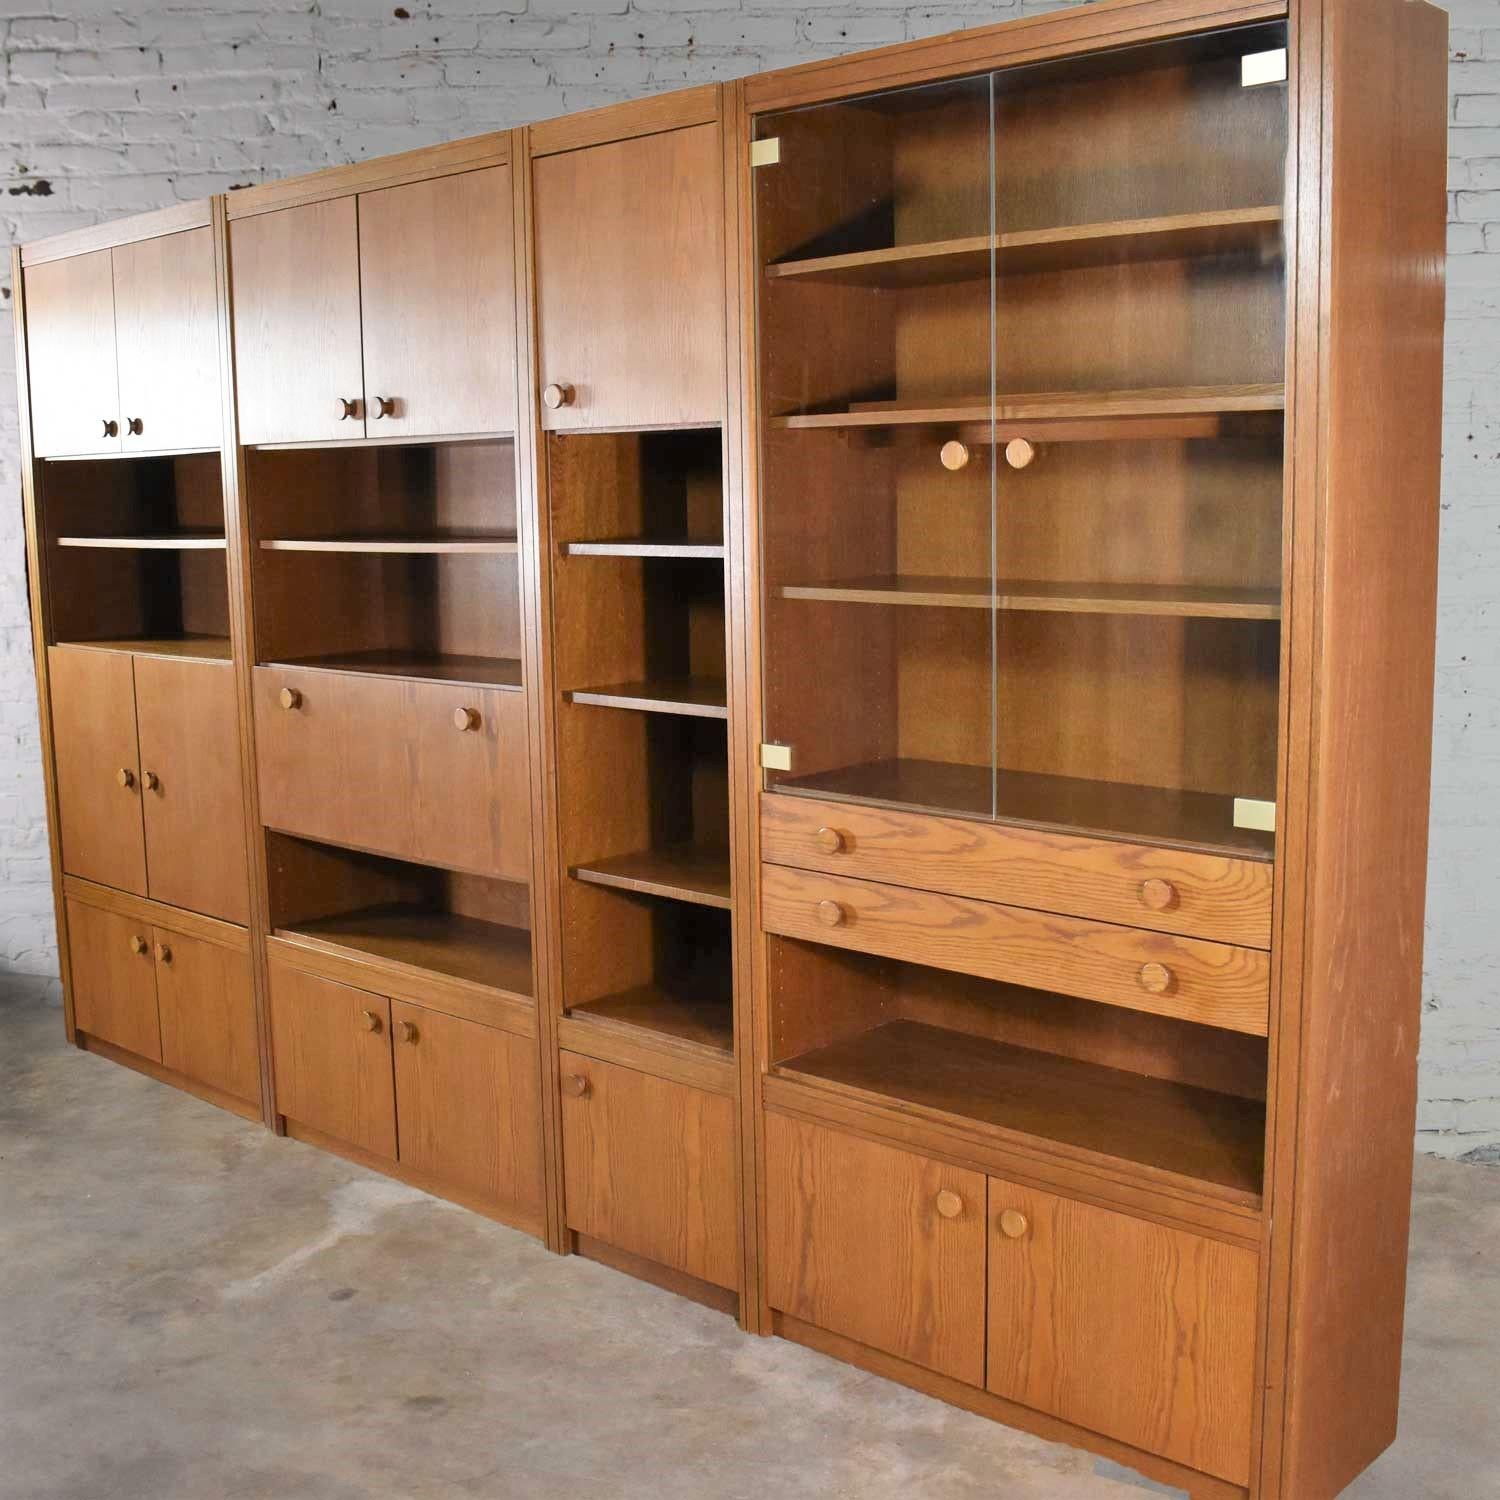 Handsome and versatile Scandinavian Modern style oak four section modular wall unit from the Lord series by Kämper Anbaumöbel. It is in wonderful vintage condition. Not without signs of age but nothing outstanding. There are a couple repairs which